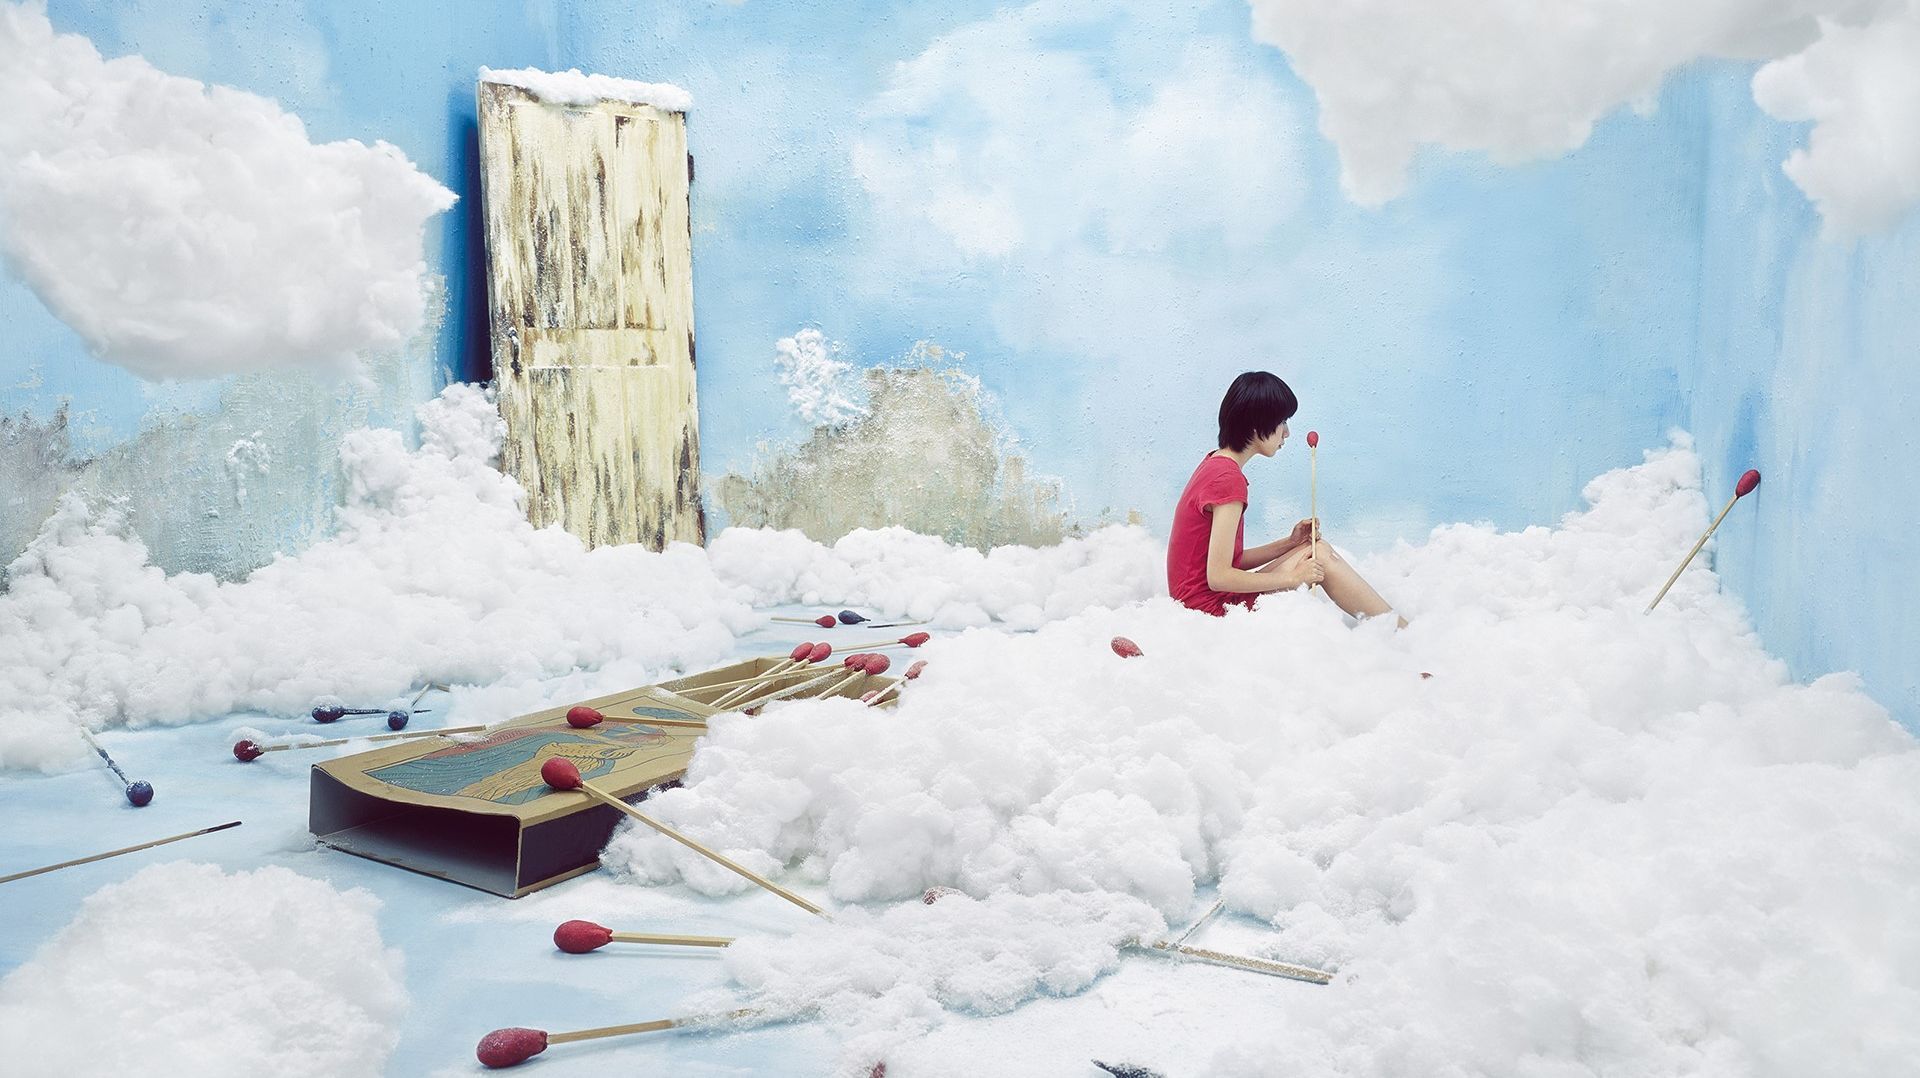 Lee Jee Young, The Little Match Girl, 2008